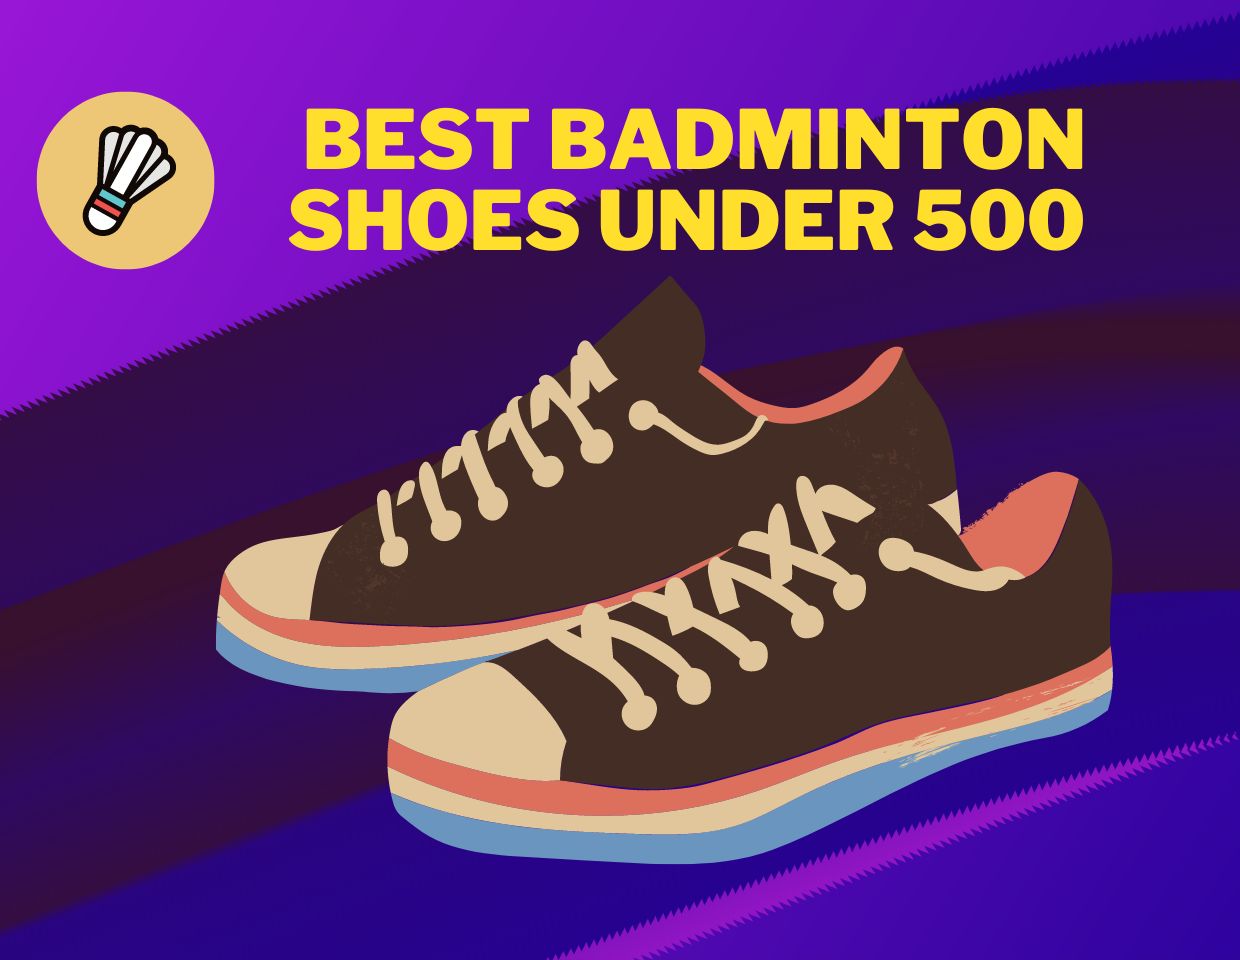 Best Badminton Shoes Under 500 |Reviews |Buying Guide